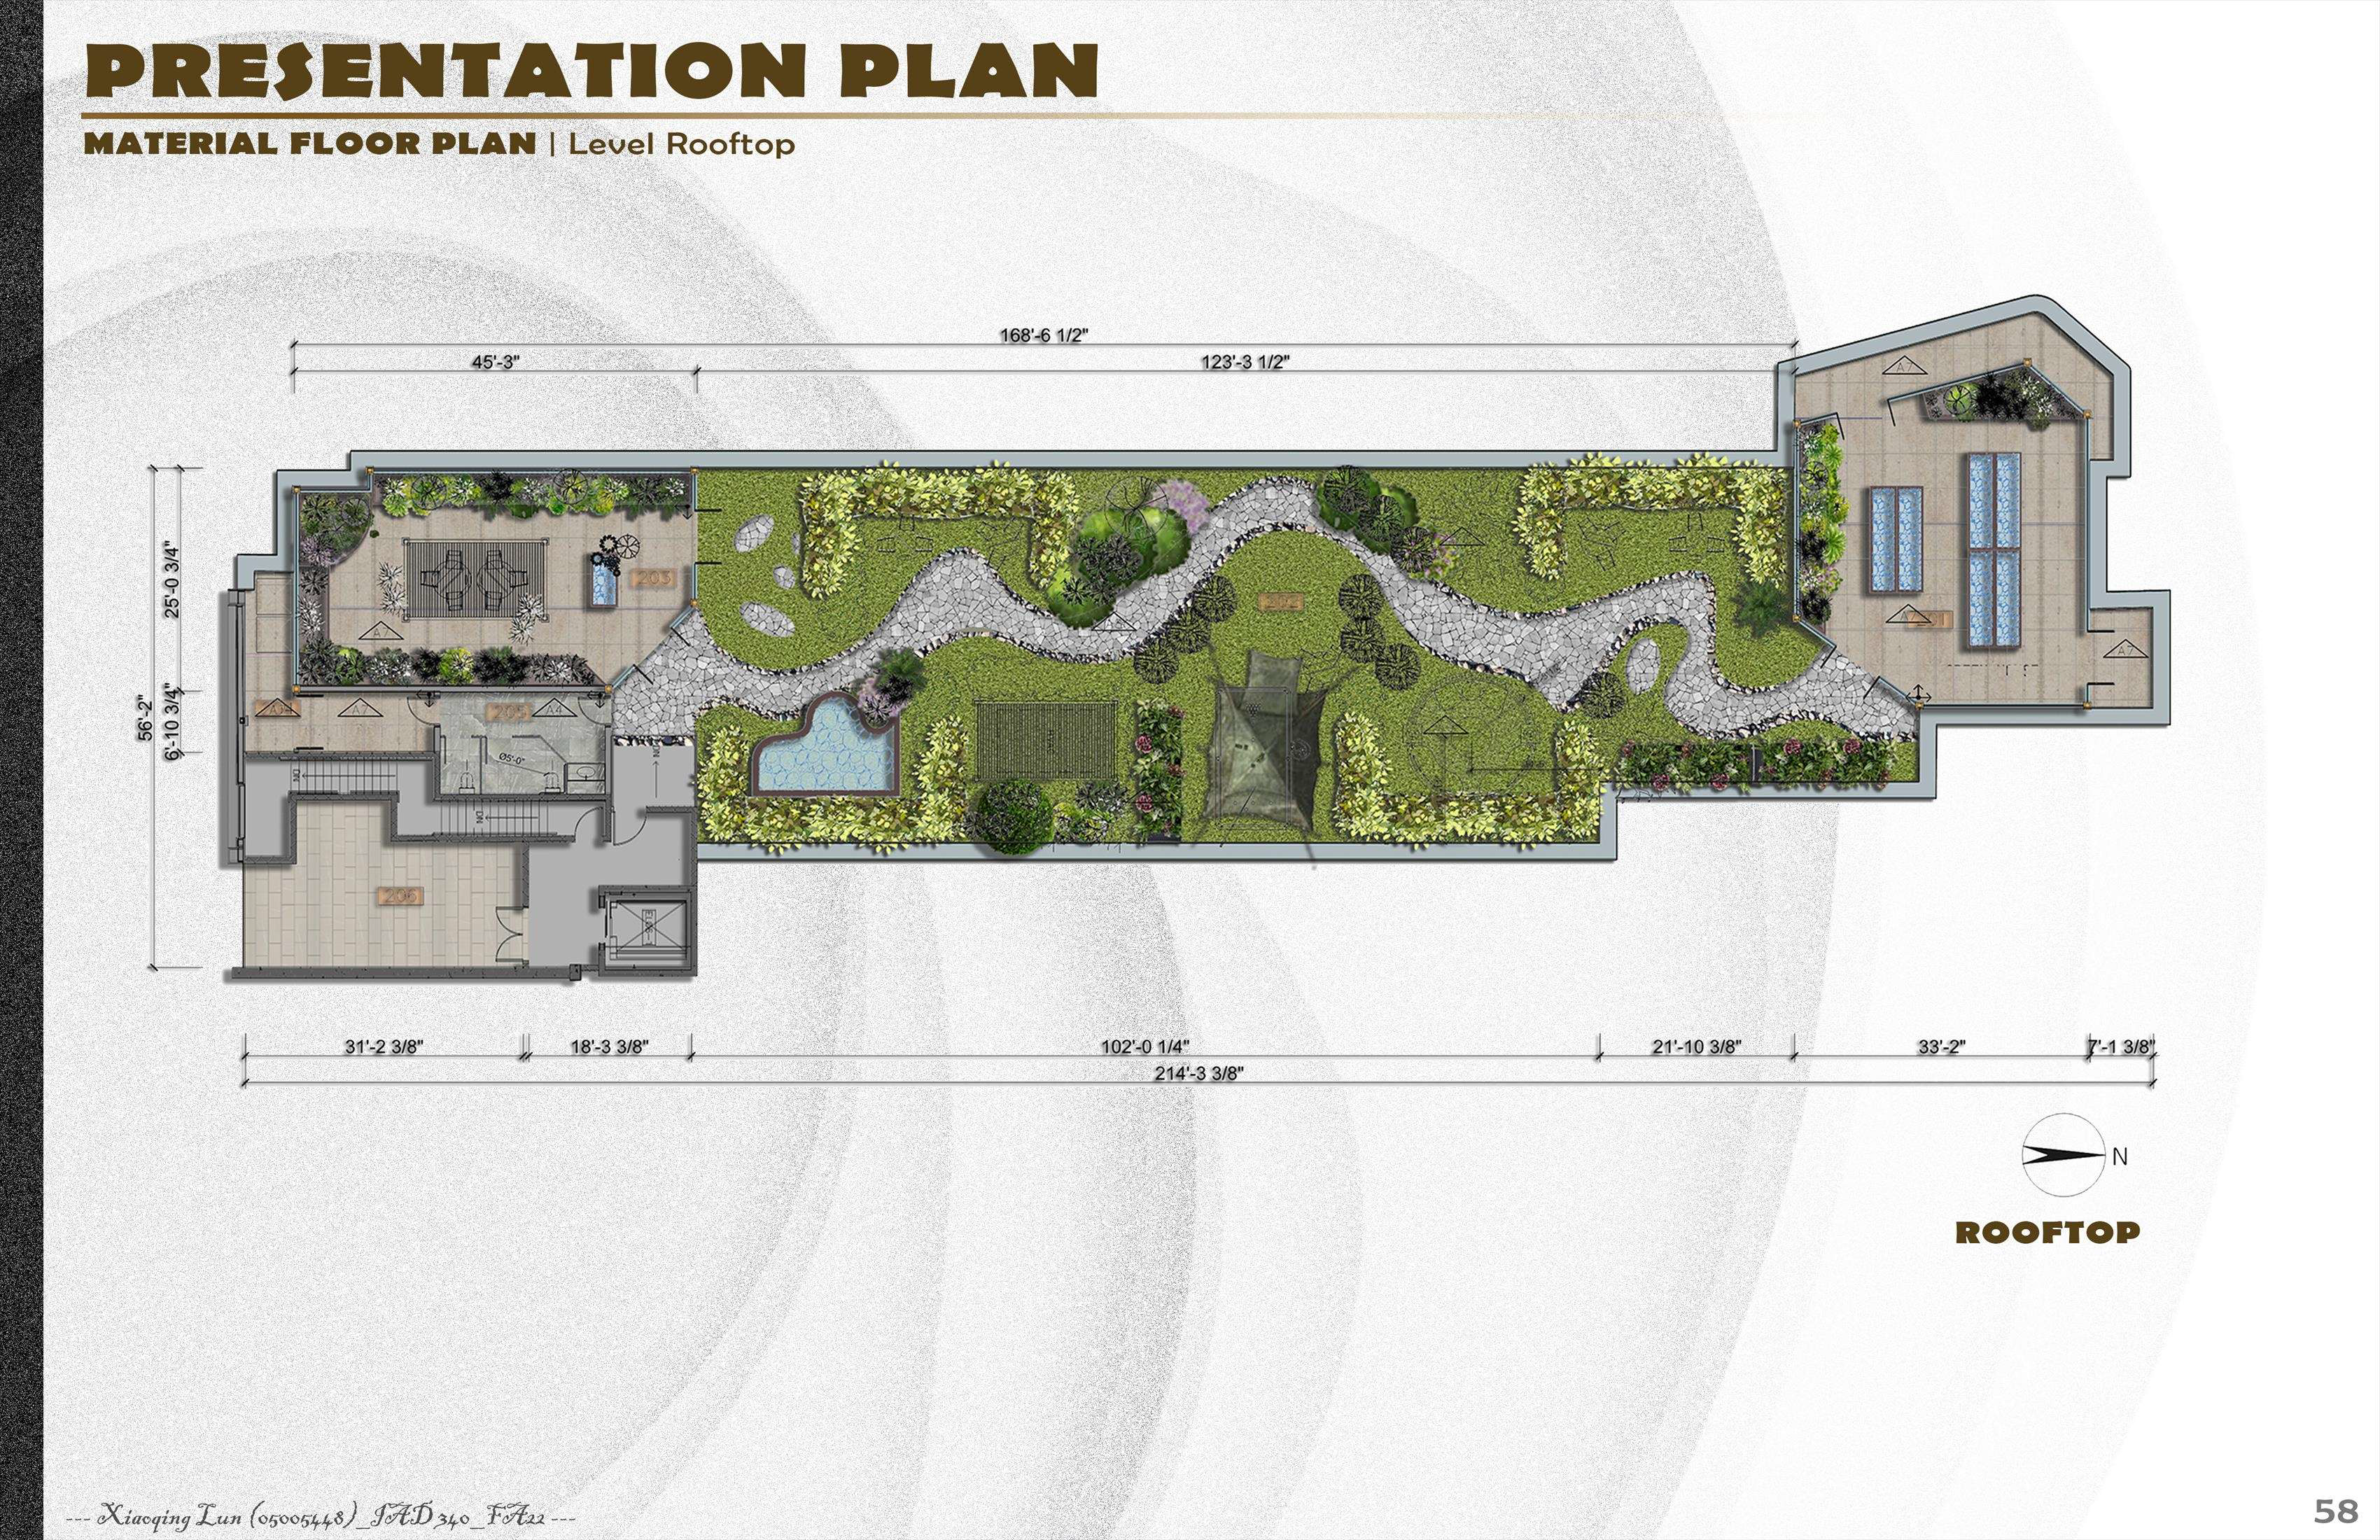 Ultimate Freshness Farm-to-Table Restaurant 05_Floor Plan & Elevation - page 3